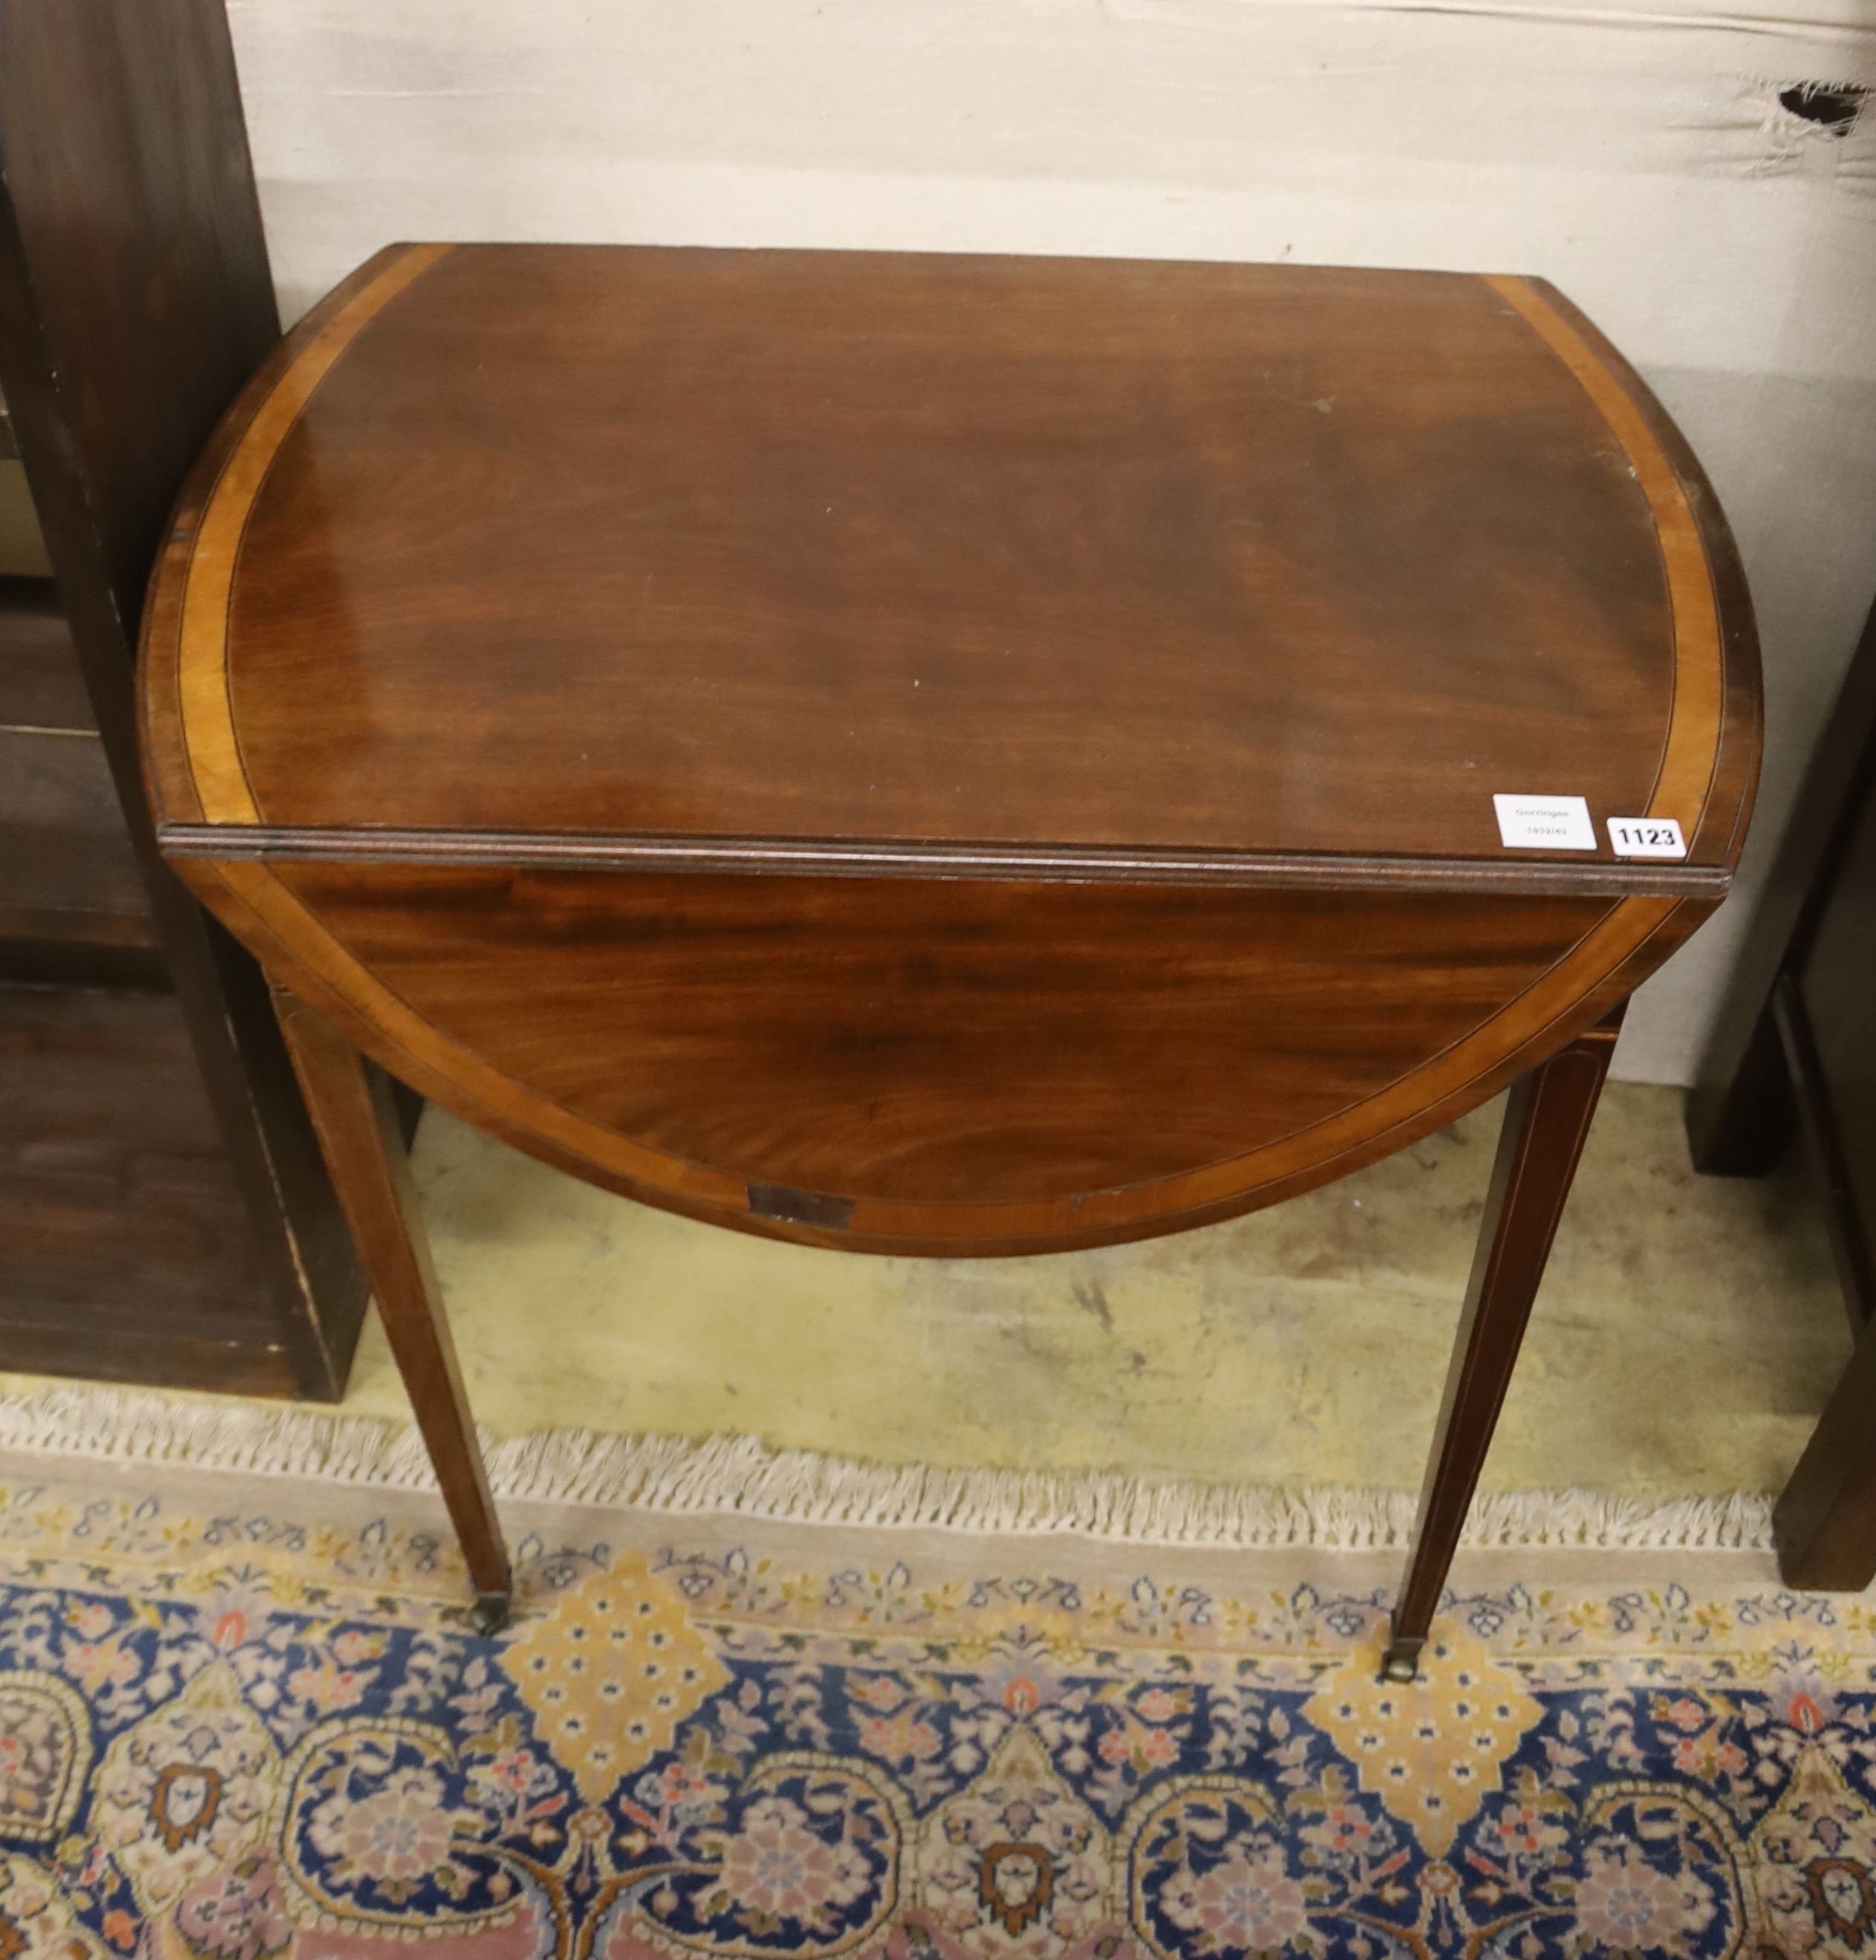 A George III mahogany and satinwood banded oval topped Pembroke table, width 79cm, depth 52cm, height 74cm